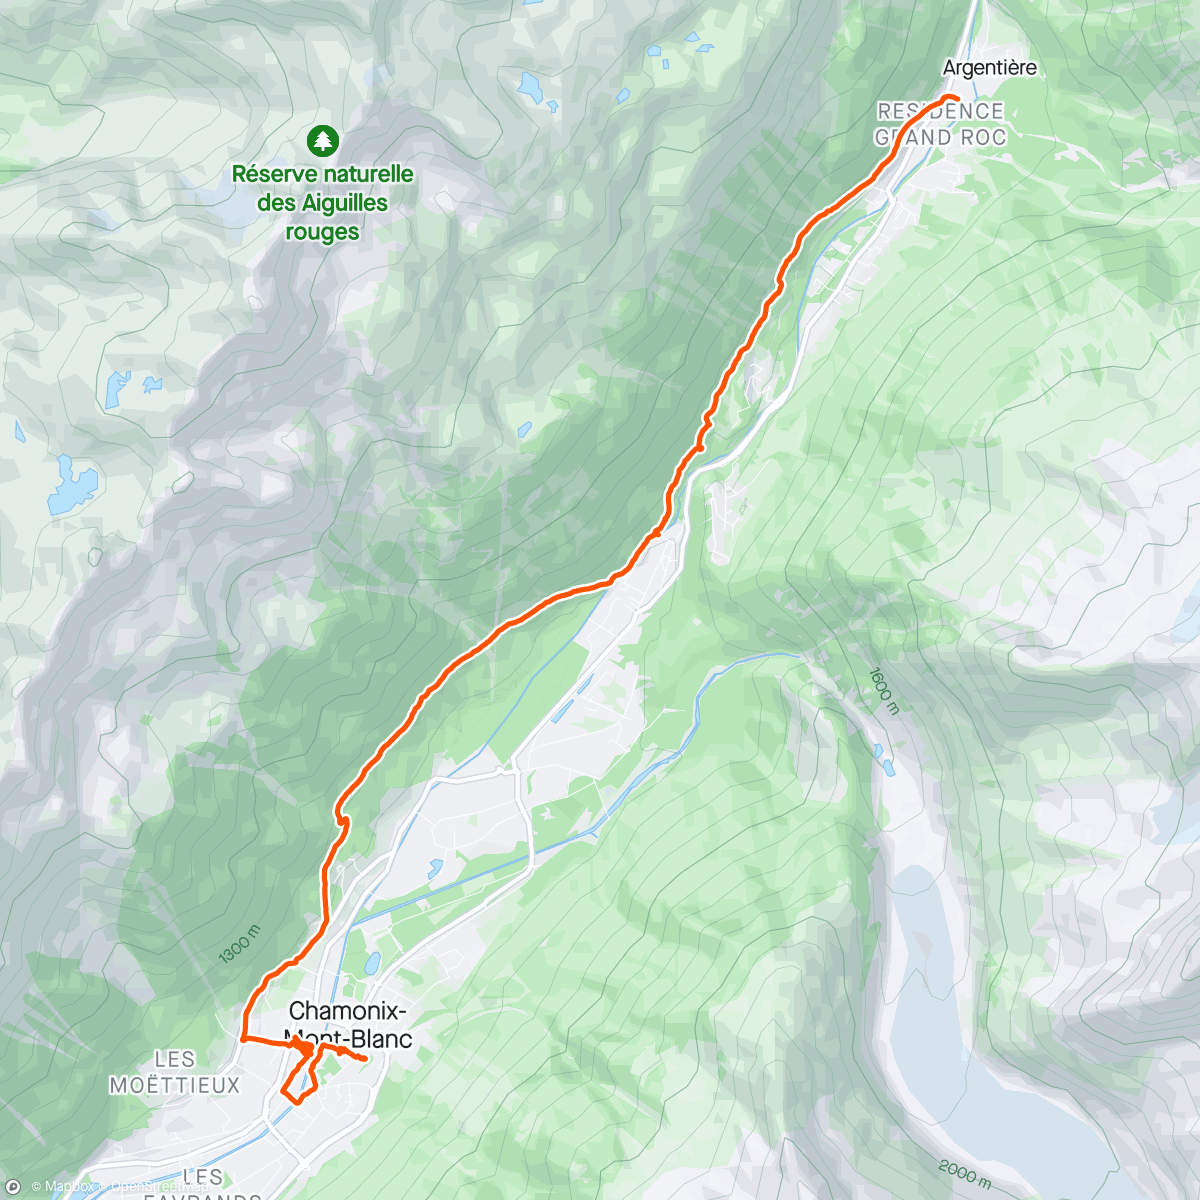 Mapa de la actividad, Chamonix time! Kept it low and dry, hiking from Argentiere to Chamonix, train back to Buet on the Mont Blanc Express🚂🏔️